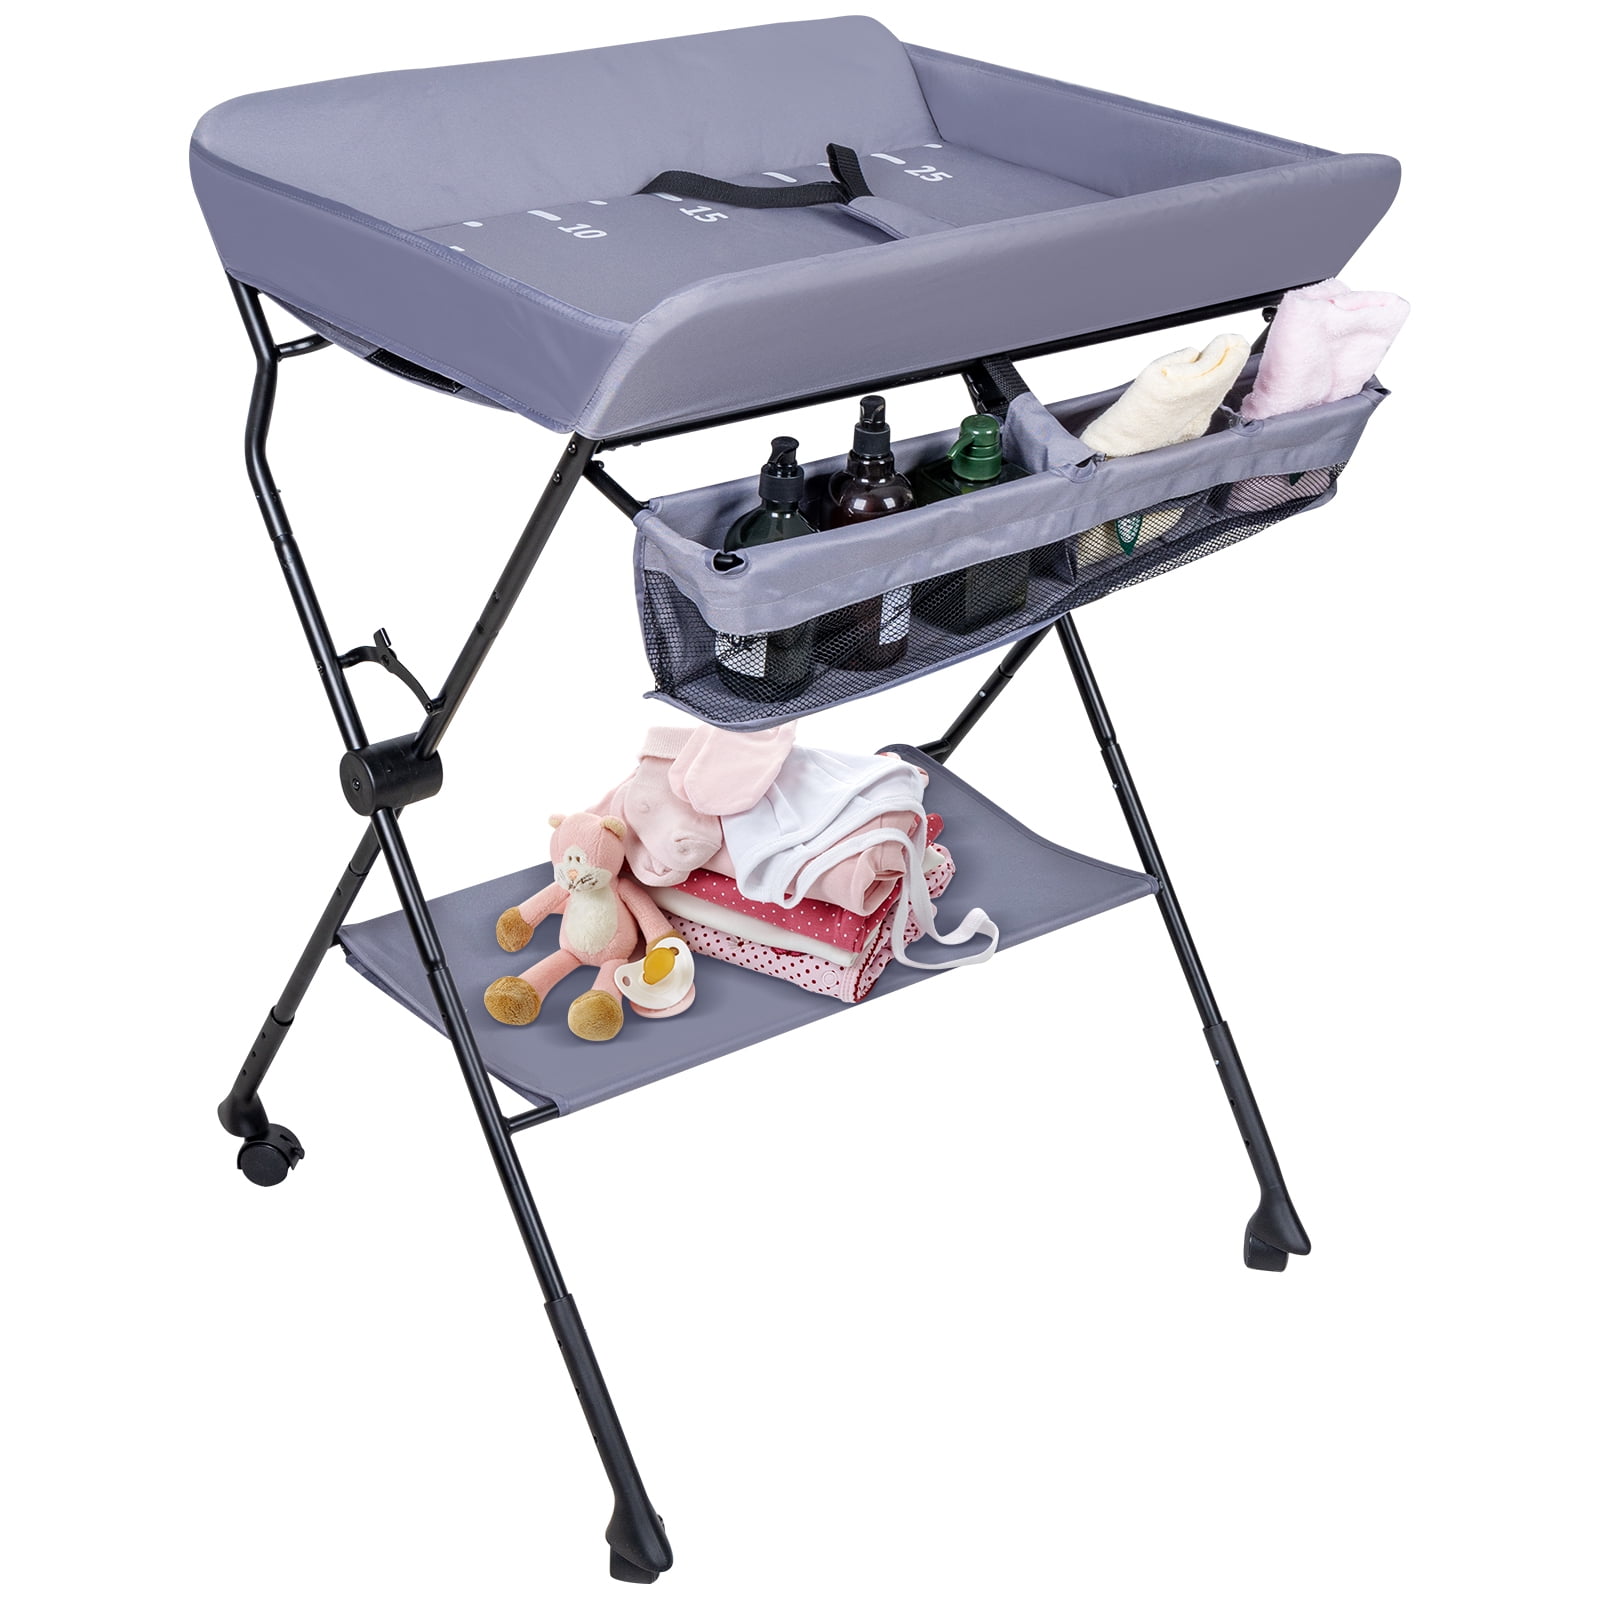 Costzon Baby Changing Table Gray+Pink Diaper Storage Nursery Station with Hamper and 3 Baskets 